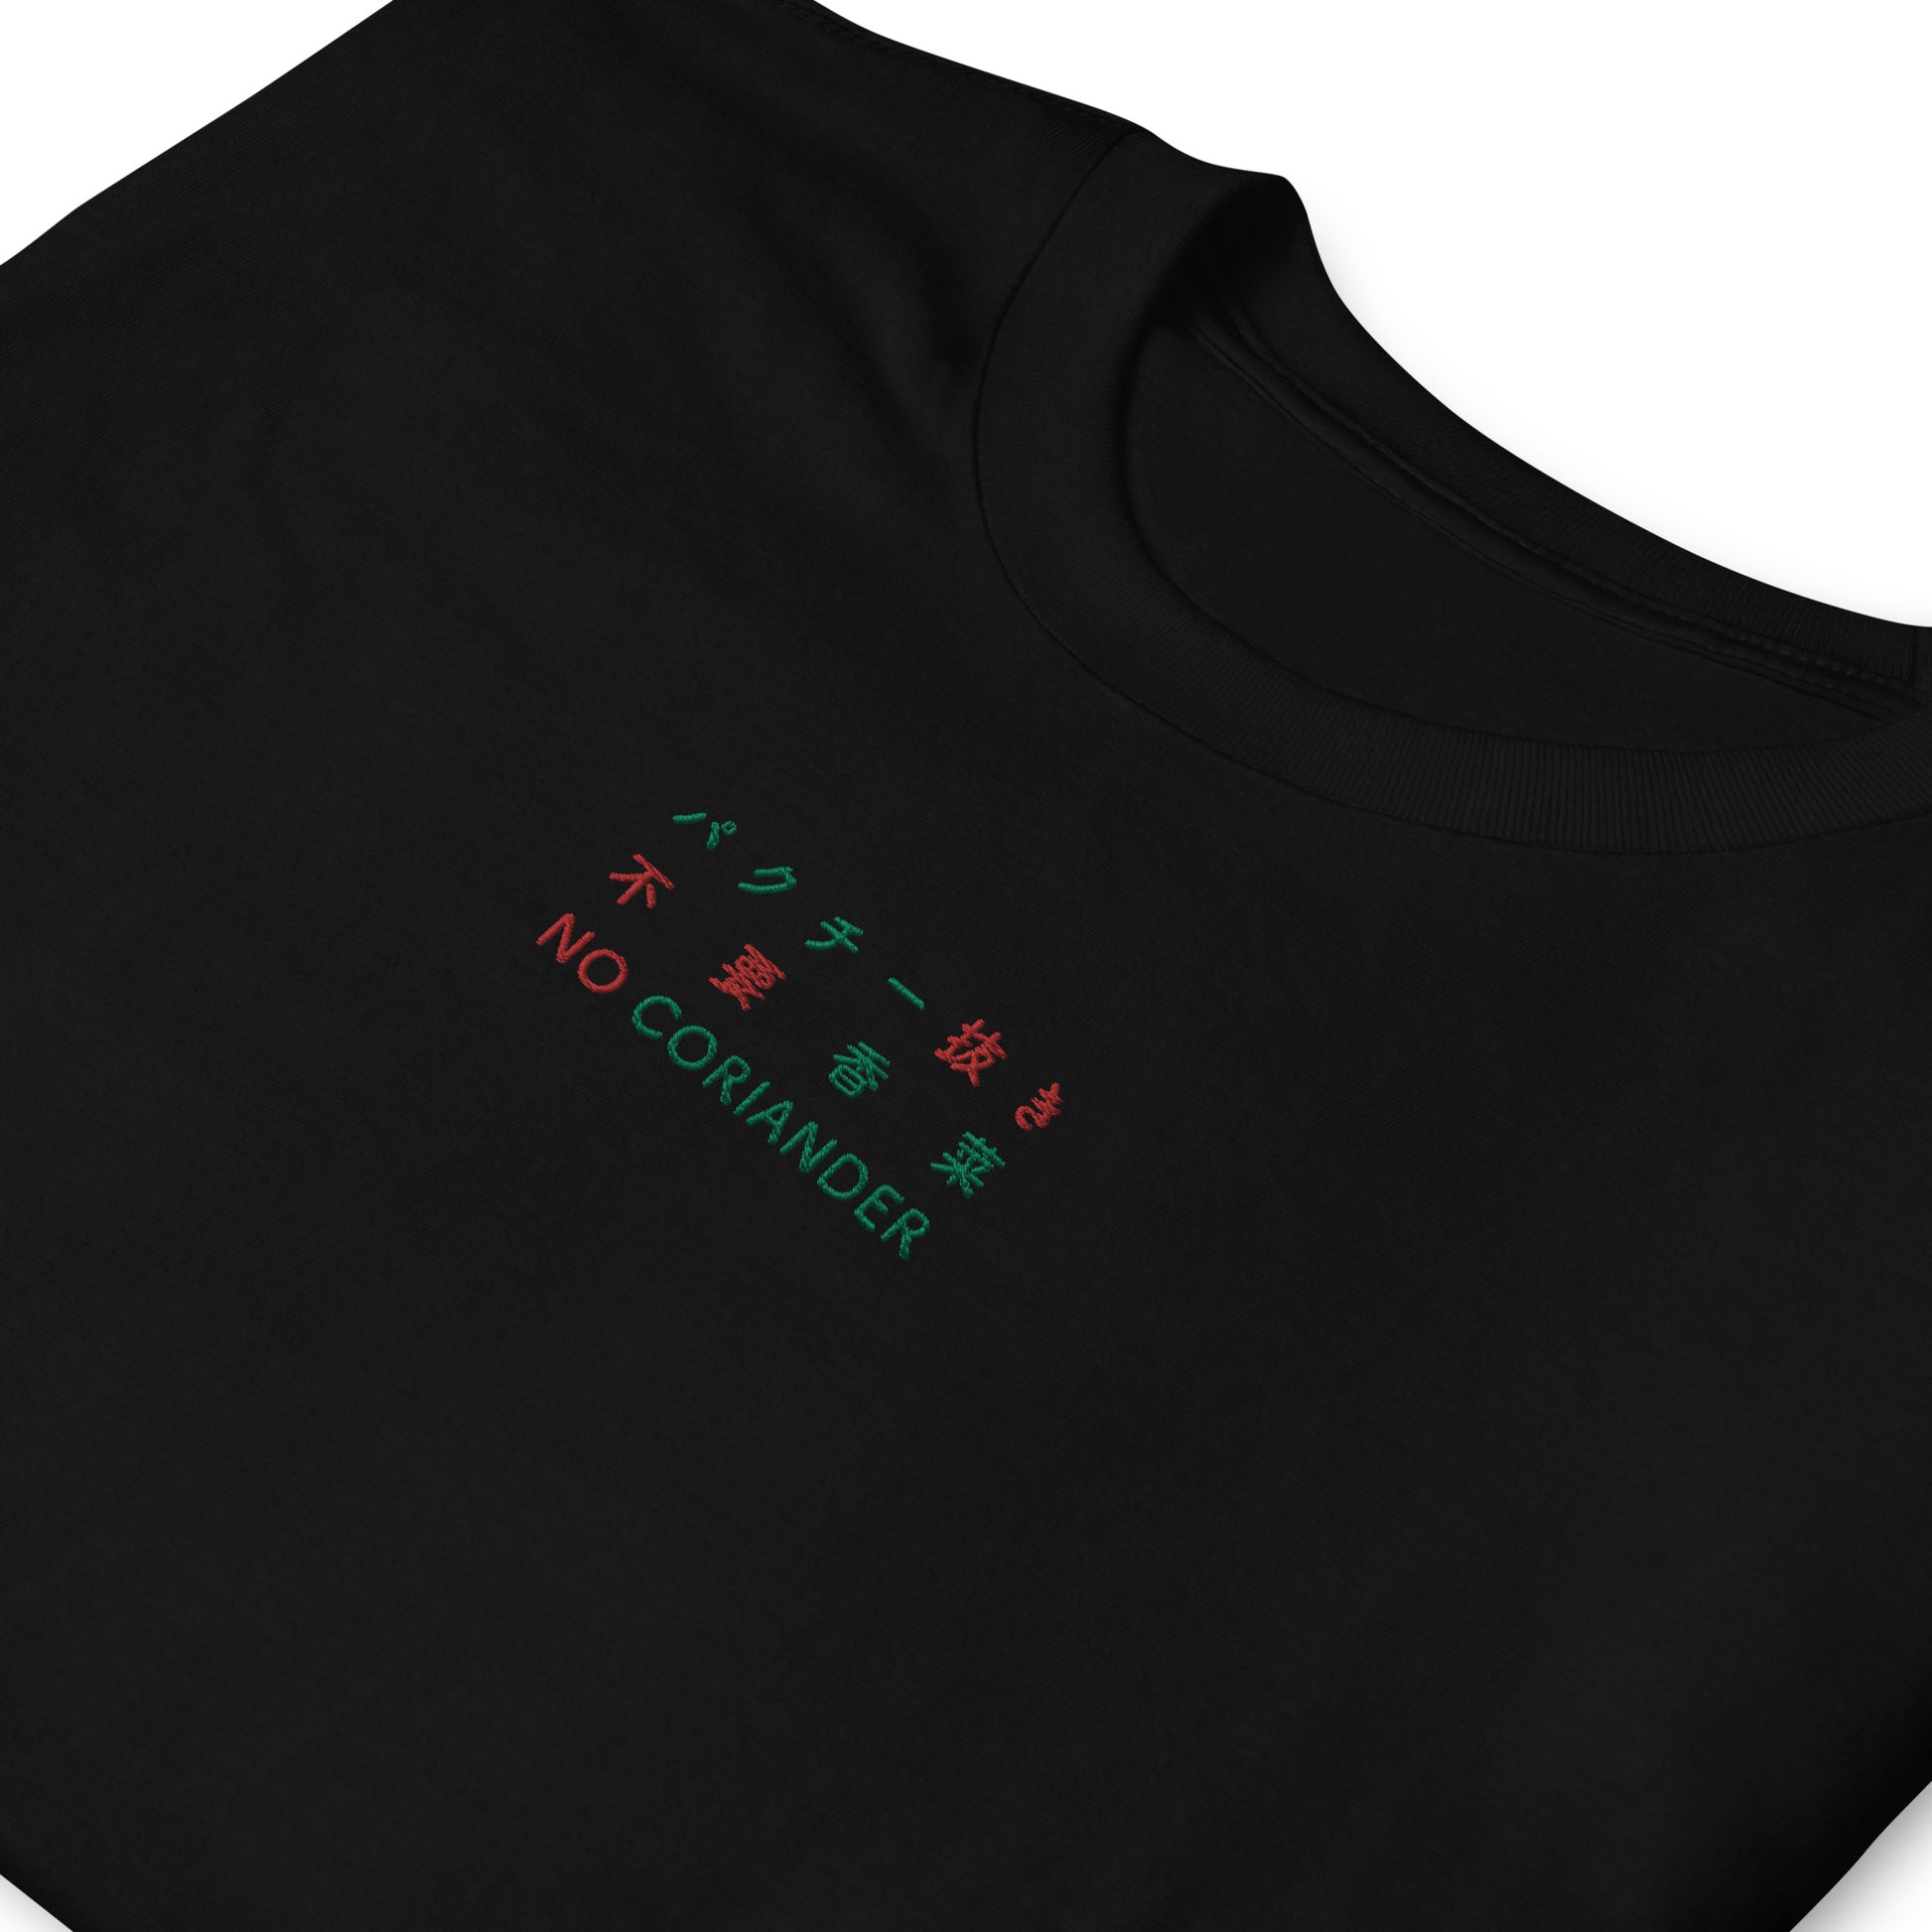 Black High Quality Tee - Front Design with Red/Green Embroidery "NO CORIANDER" in three languages